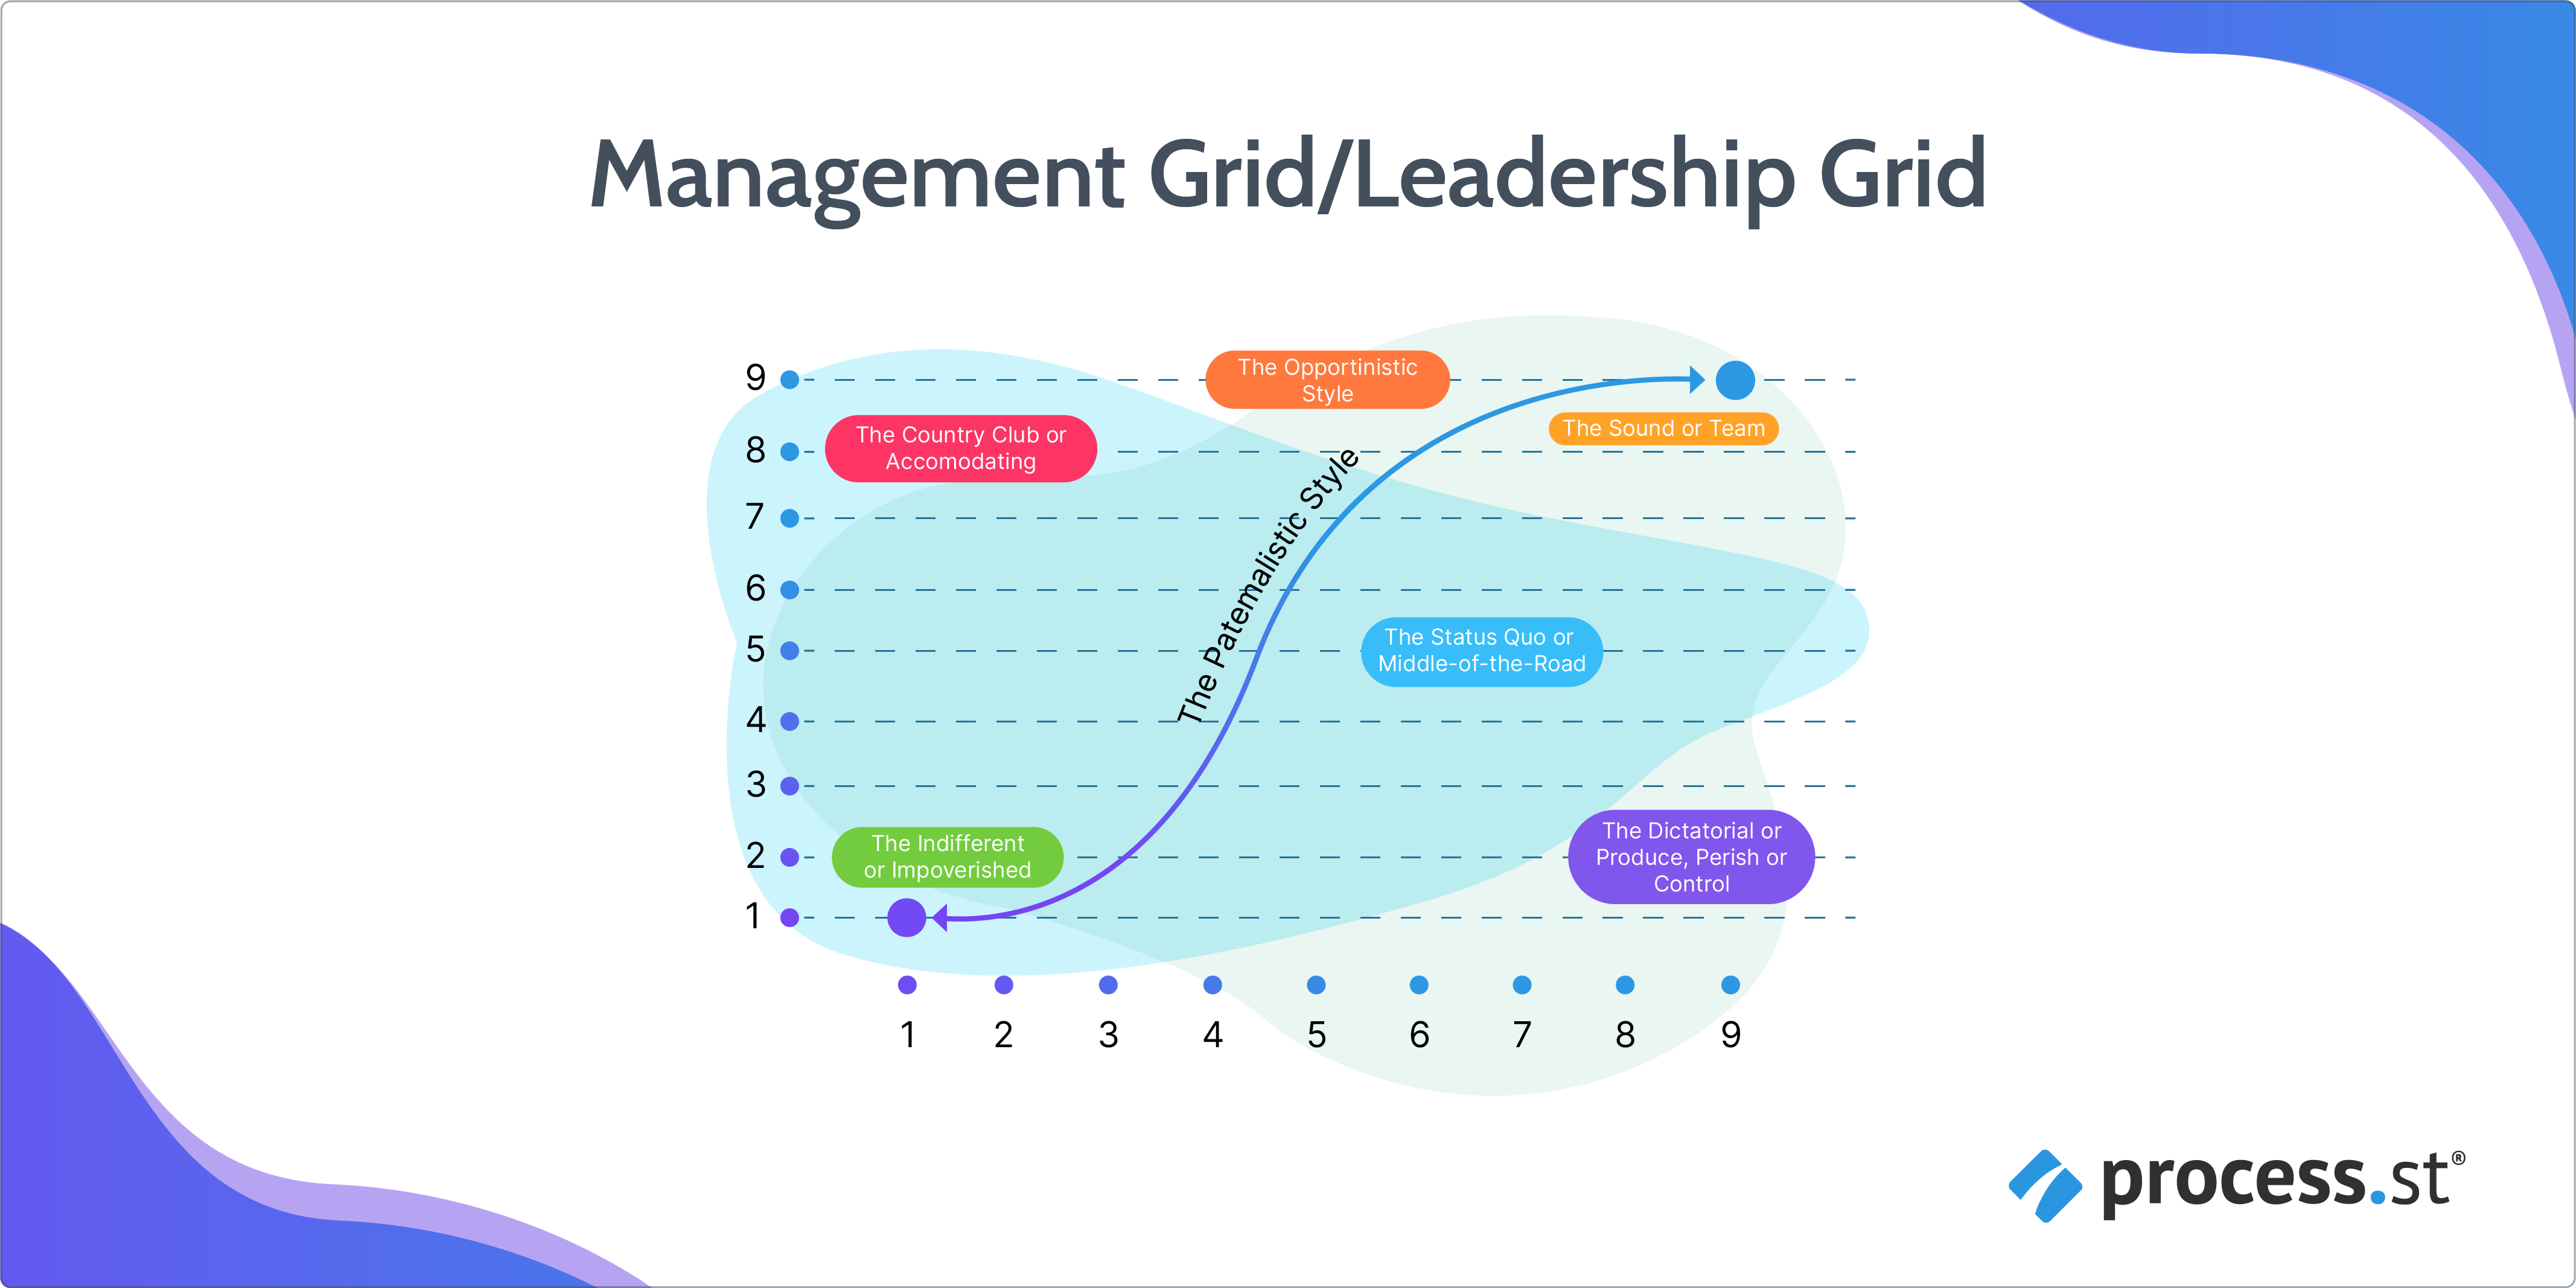 Managerial Grid model